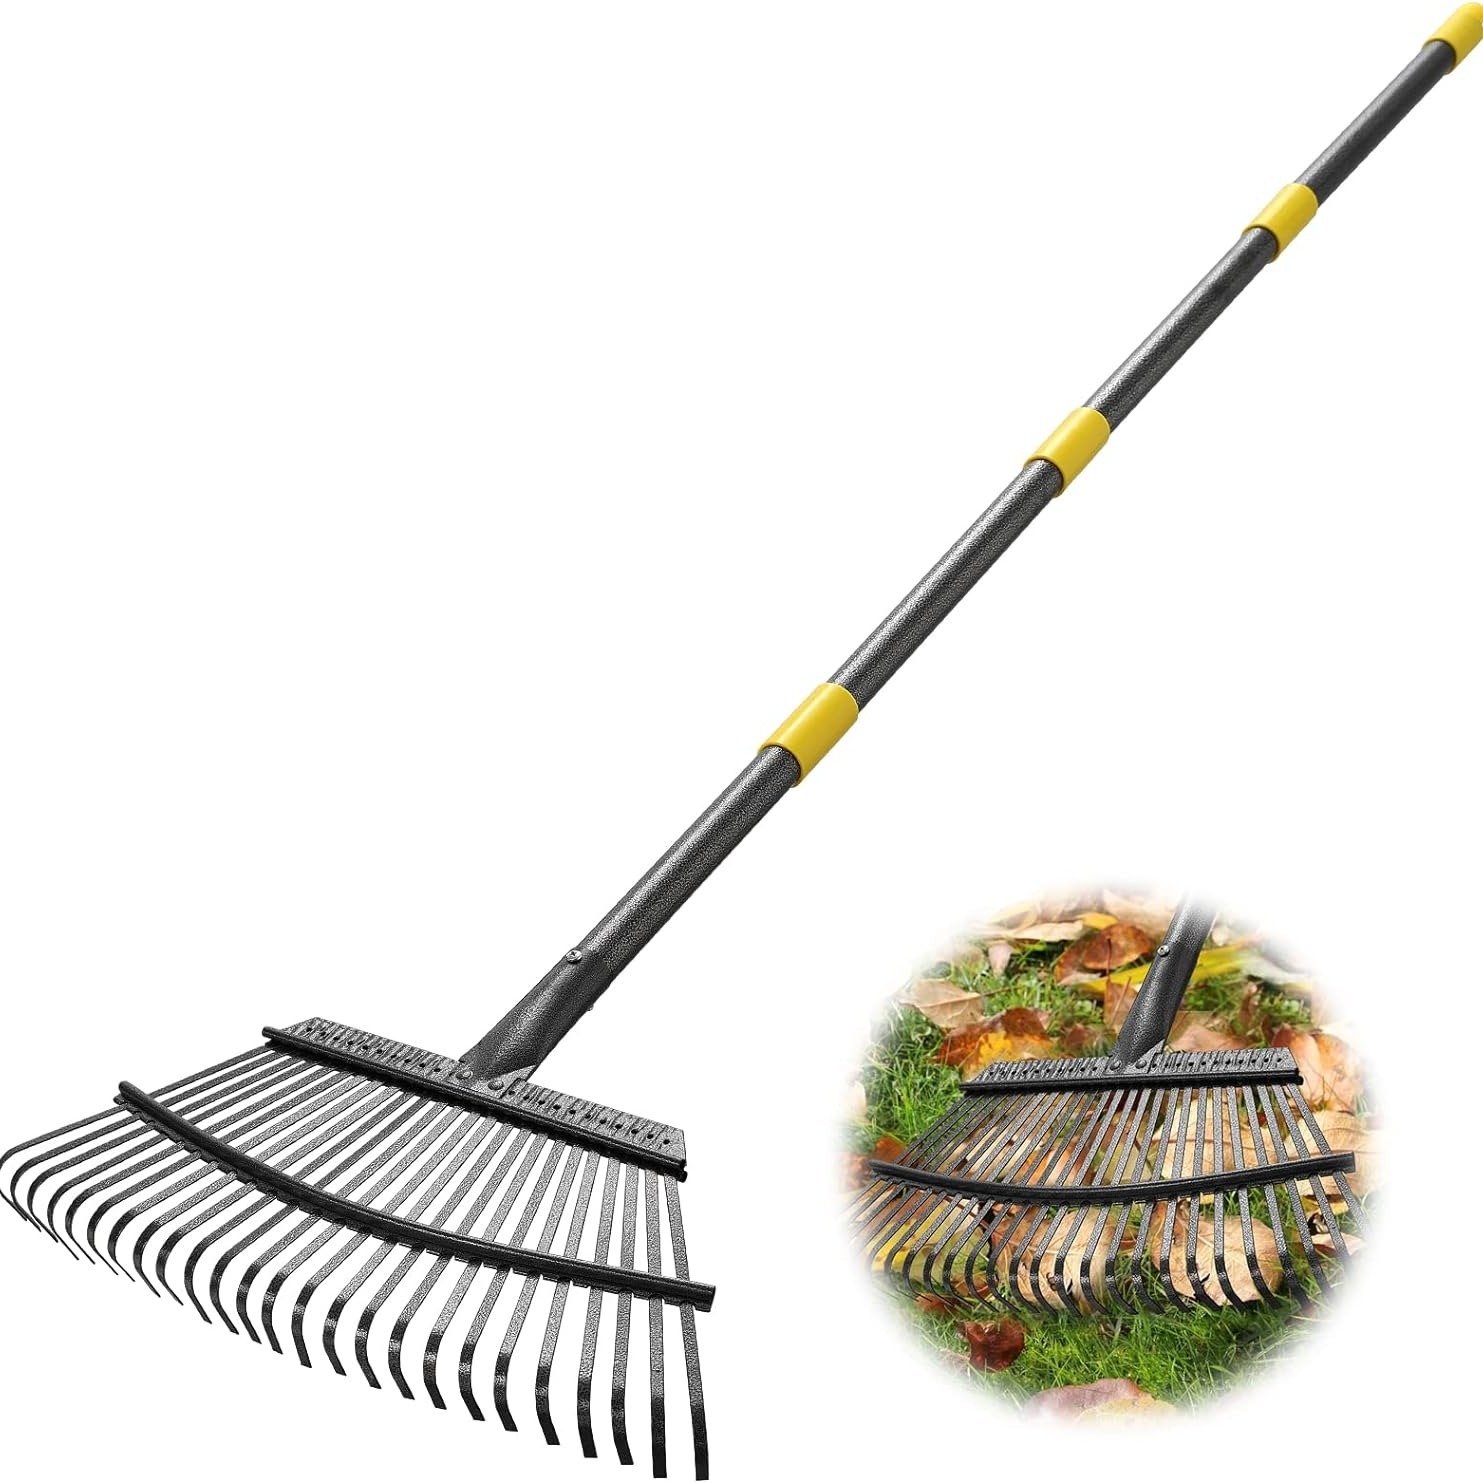 

65 Inch Rake For Leaves, Rakes For Lawns Heavy Duty Hoe Lawns Leaf Lawn Leveling Rake Yard Tools For Picking Up Leaves, Grass Clippings, Garbage With 25 Metal Tines Ergonomics Adjustable Handle